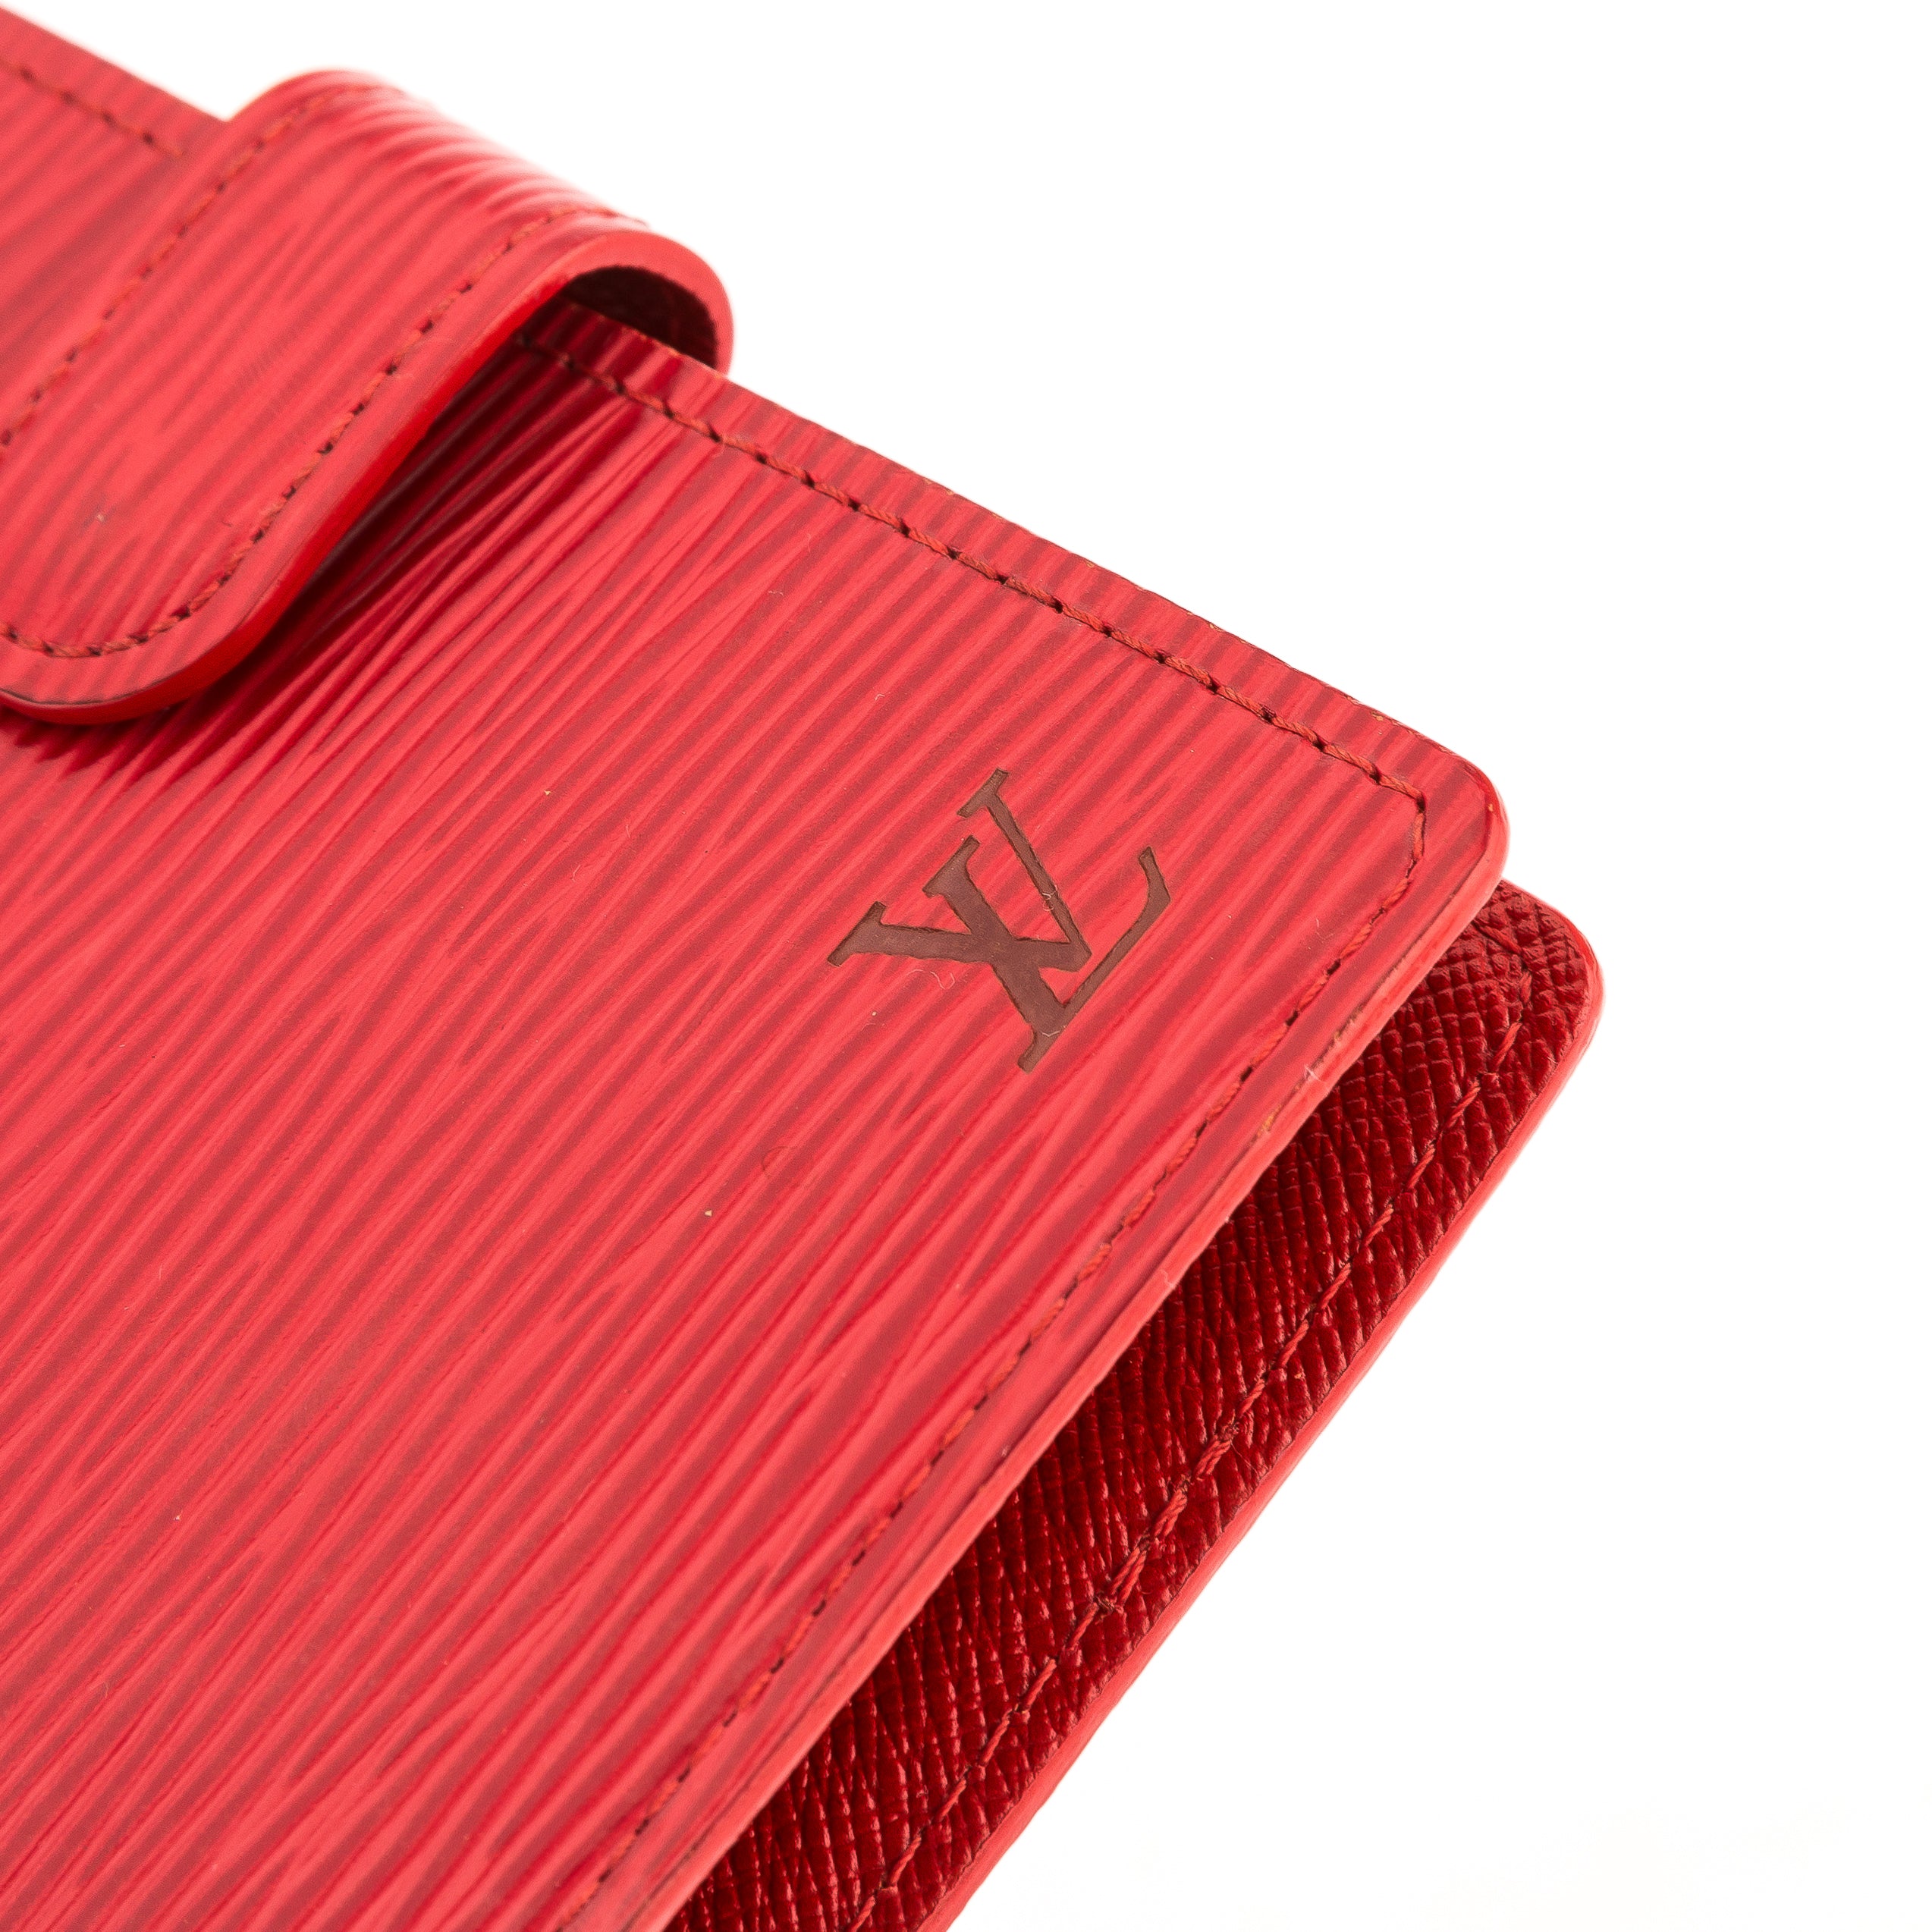 Louis Vuitton Agenda Pm Red Leather Wallet (Pre-Owned)